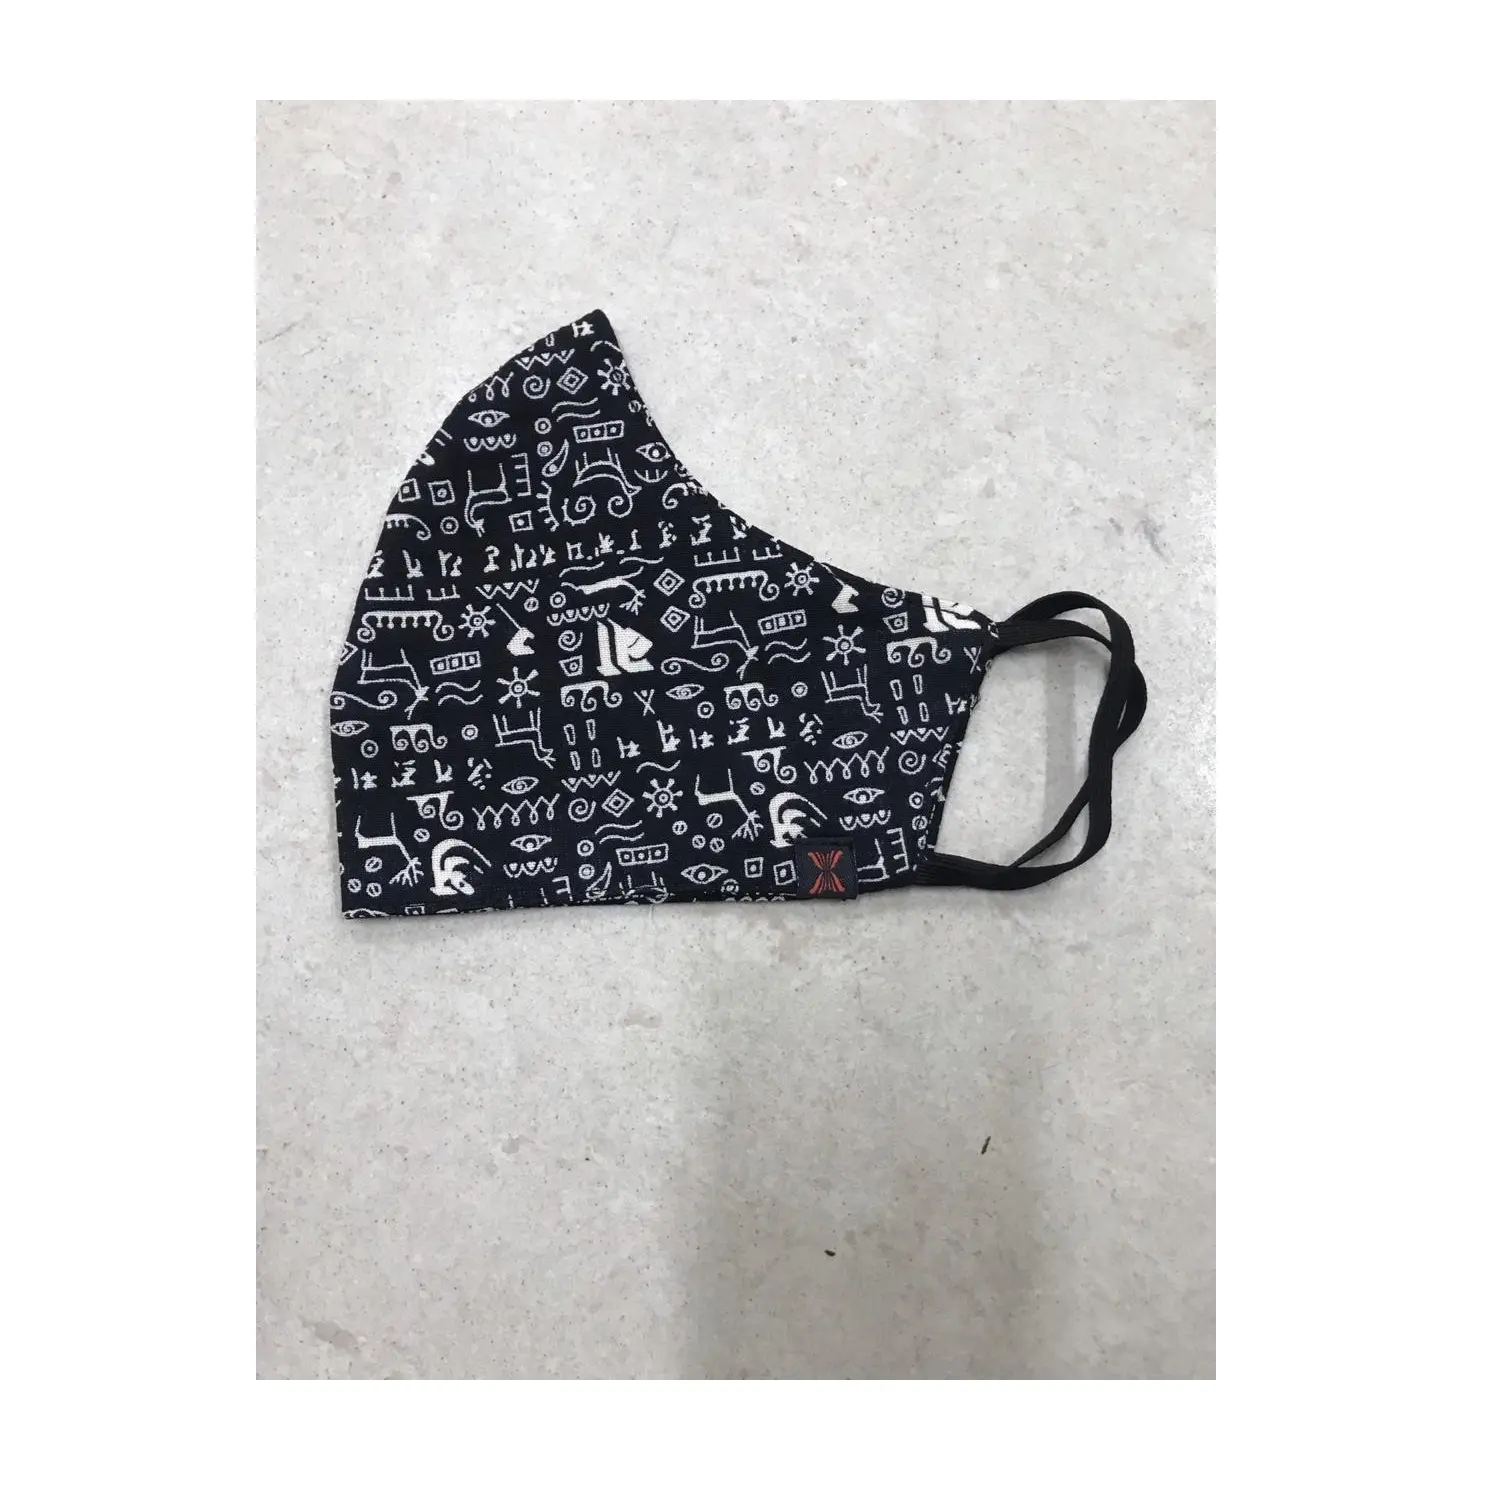 Mask- Cotton Face Reusable Custom Print Dustproof Cloth Mouth Mask- Anti Dust 5 Layer Cotton - Printed - Made In India